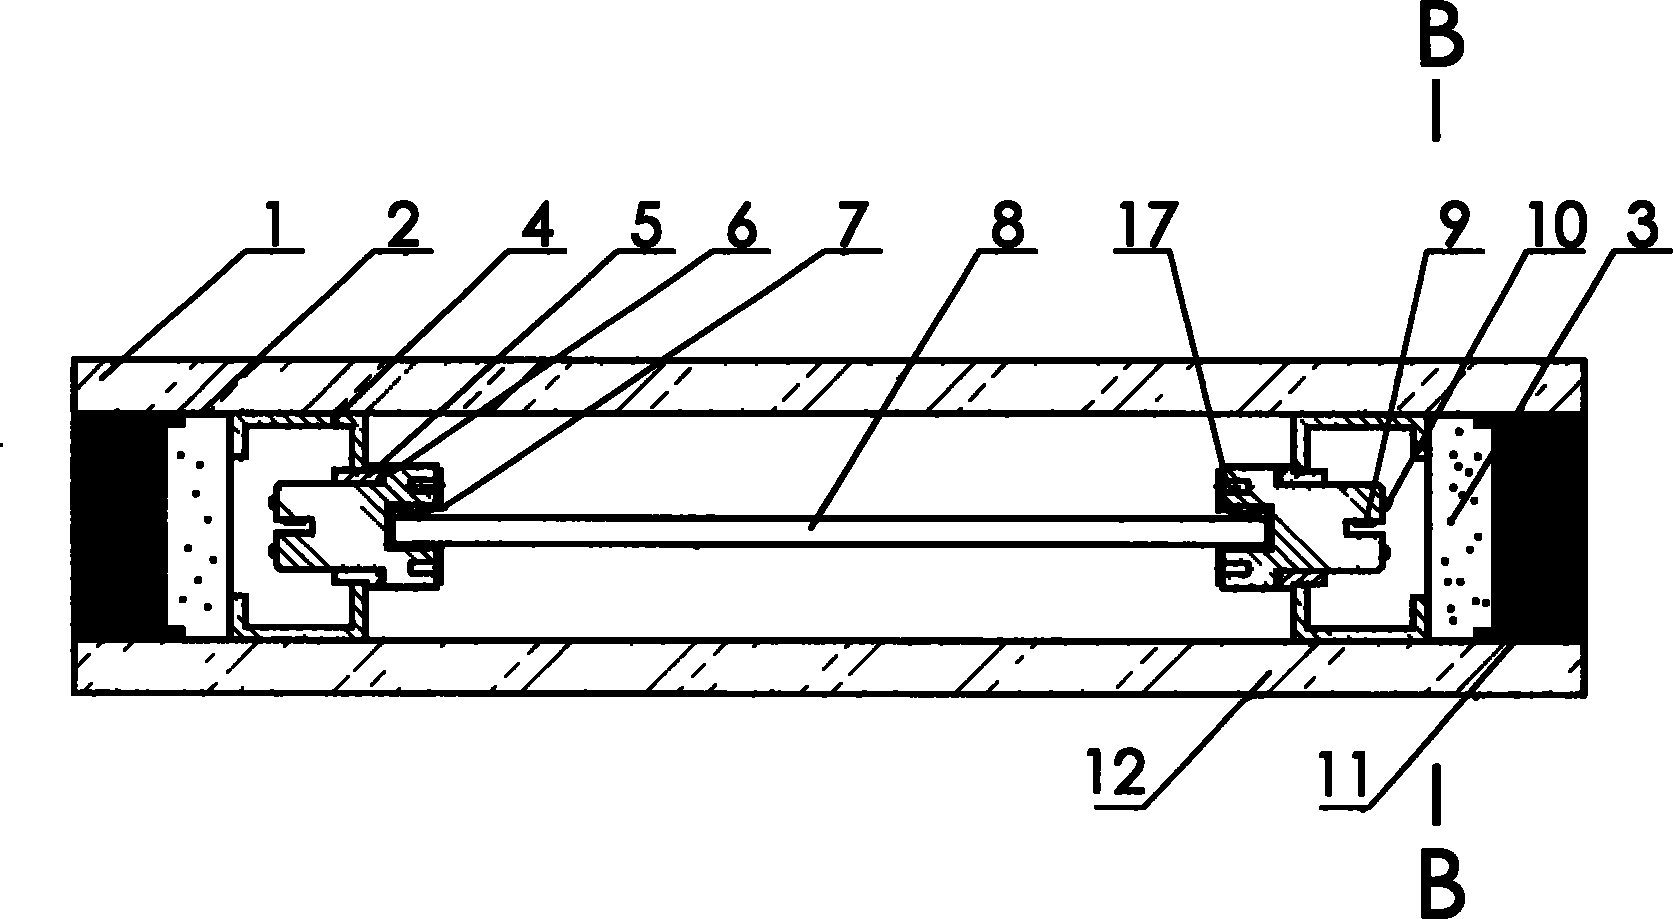 Insulating glass with built-in photovoltaic shutter